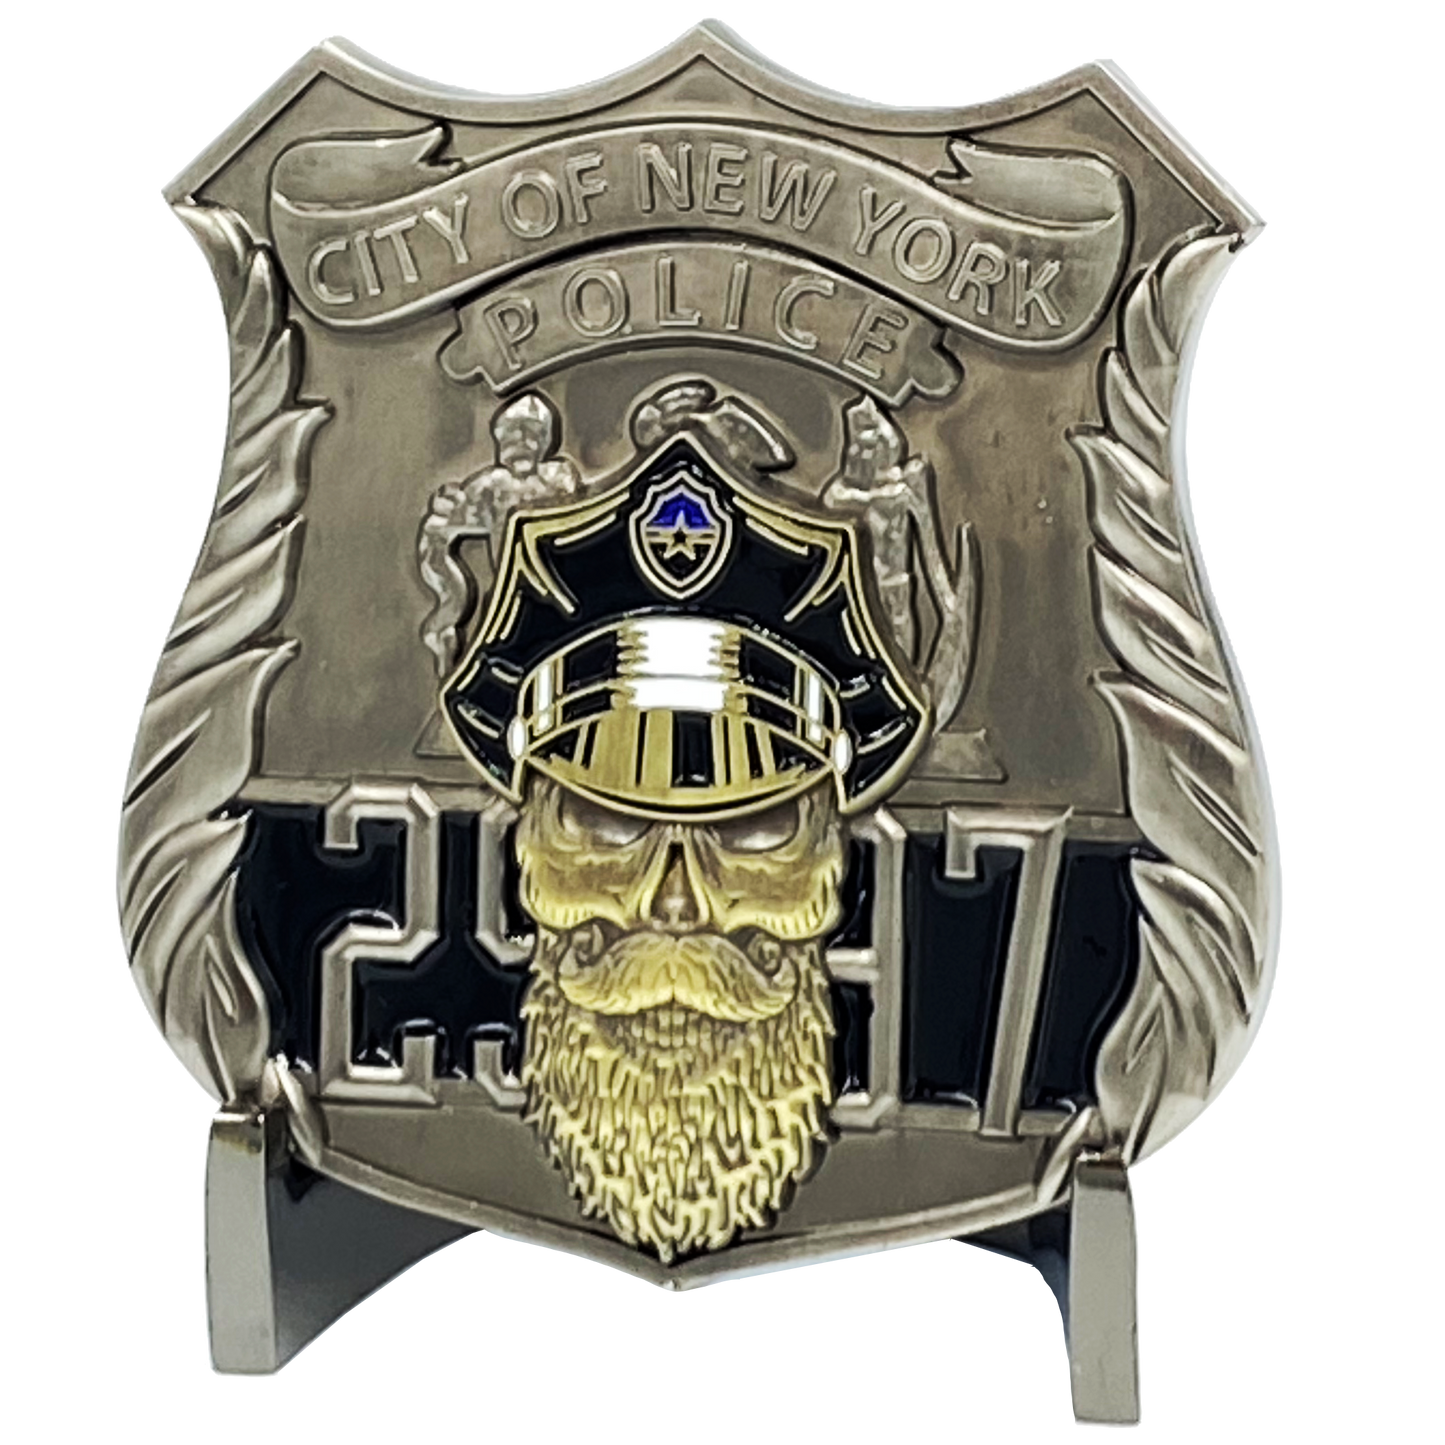 K-005 NYPD police officer Thin Blue Line Challenge Coin New York City Back the Blue Beard Gang